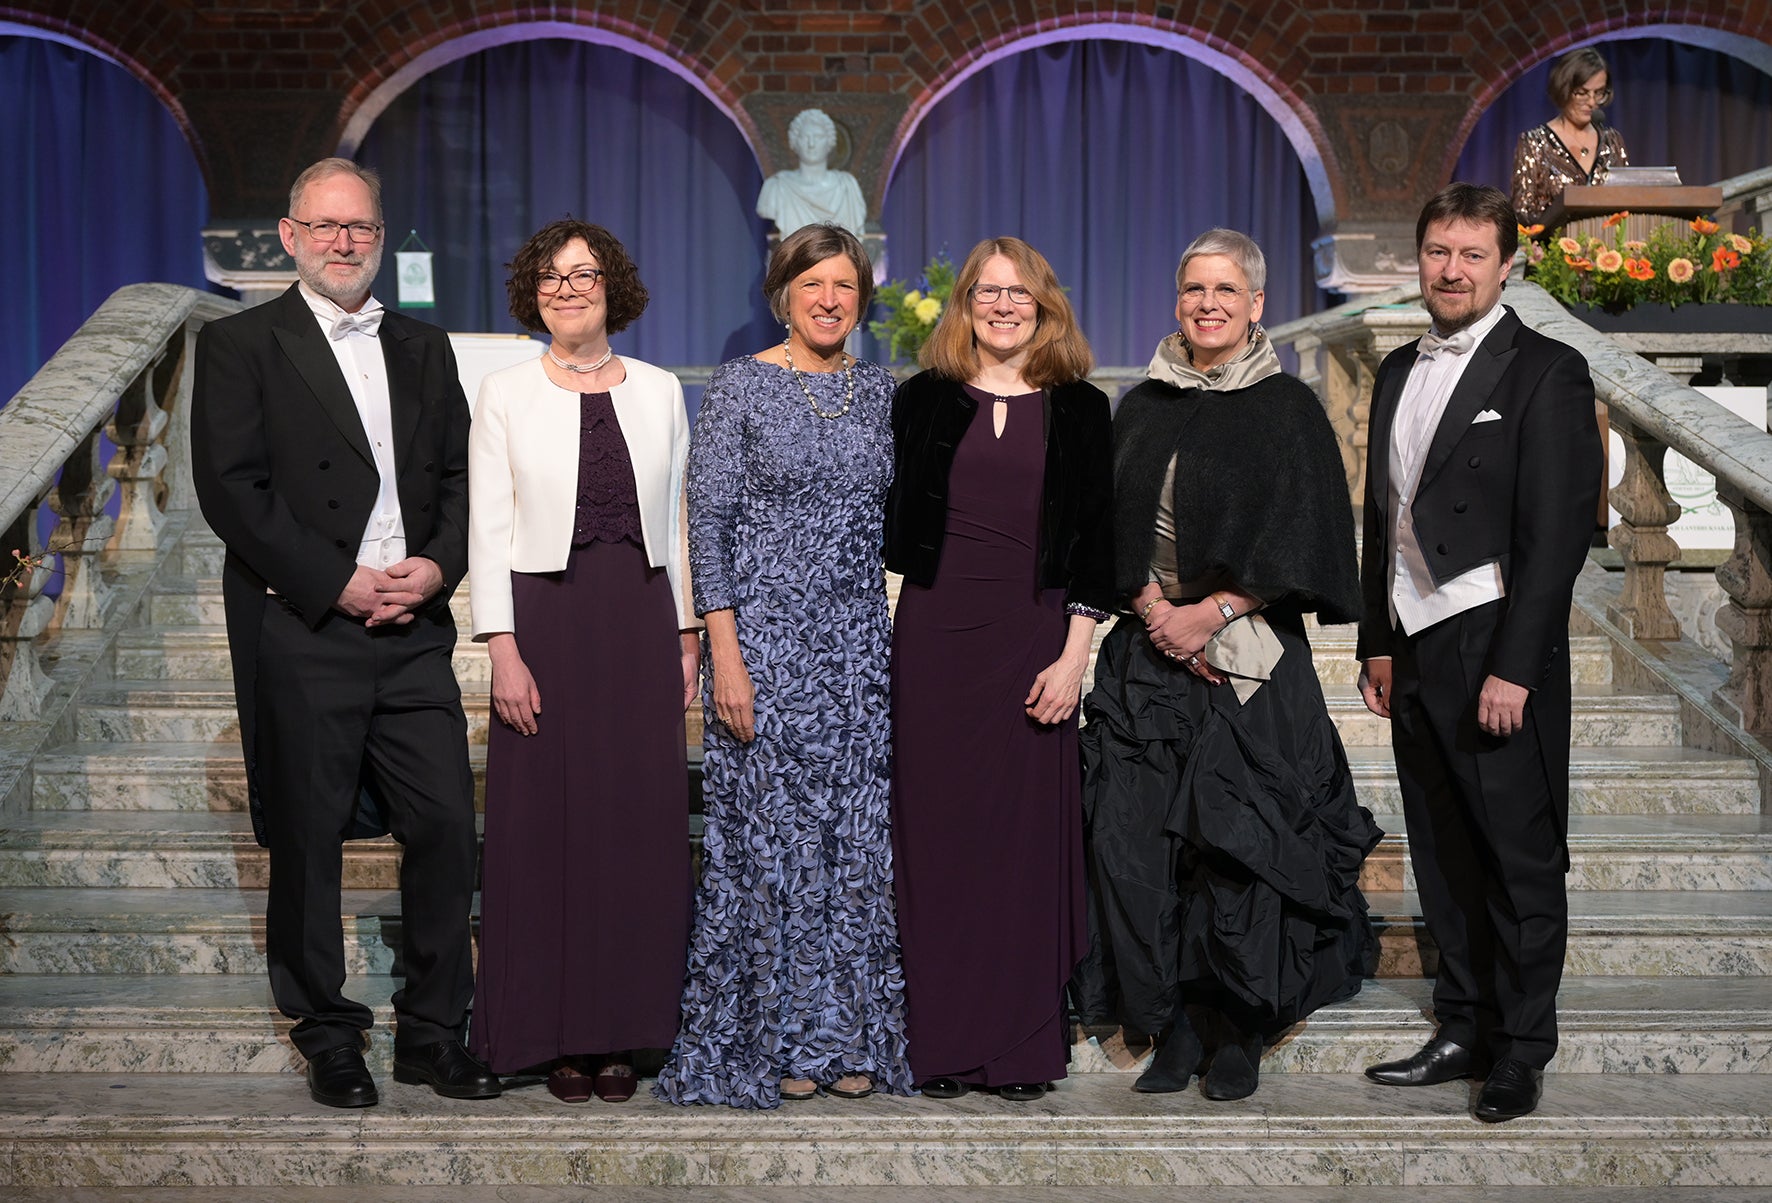 The new international fellows inducted into the Swedish Royal Academy of Agriculture and Forestry. From left to right: Dag Fjeld, Sally Shortall, Pamela Ronald, Jennifer Clapp, Beatrix Alsanius, and Marius Masiulis.